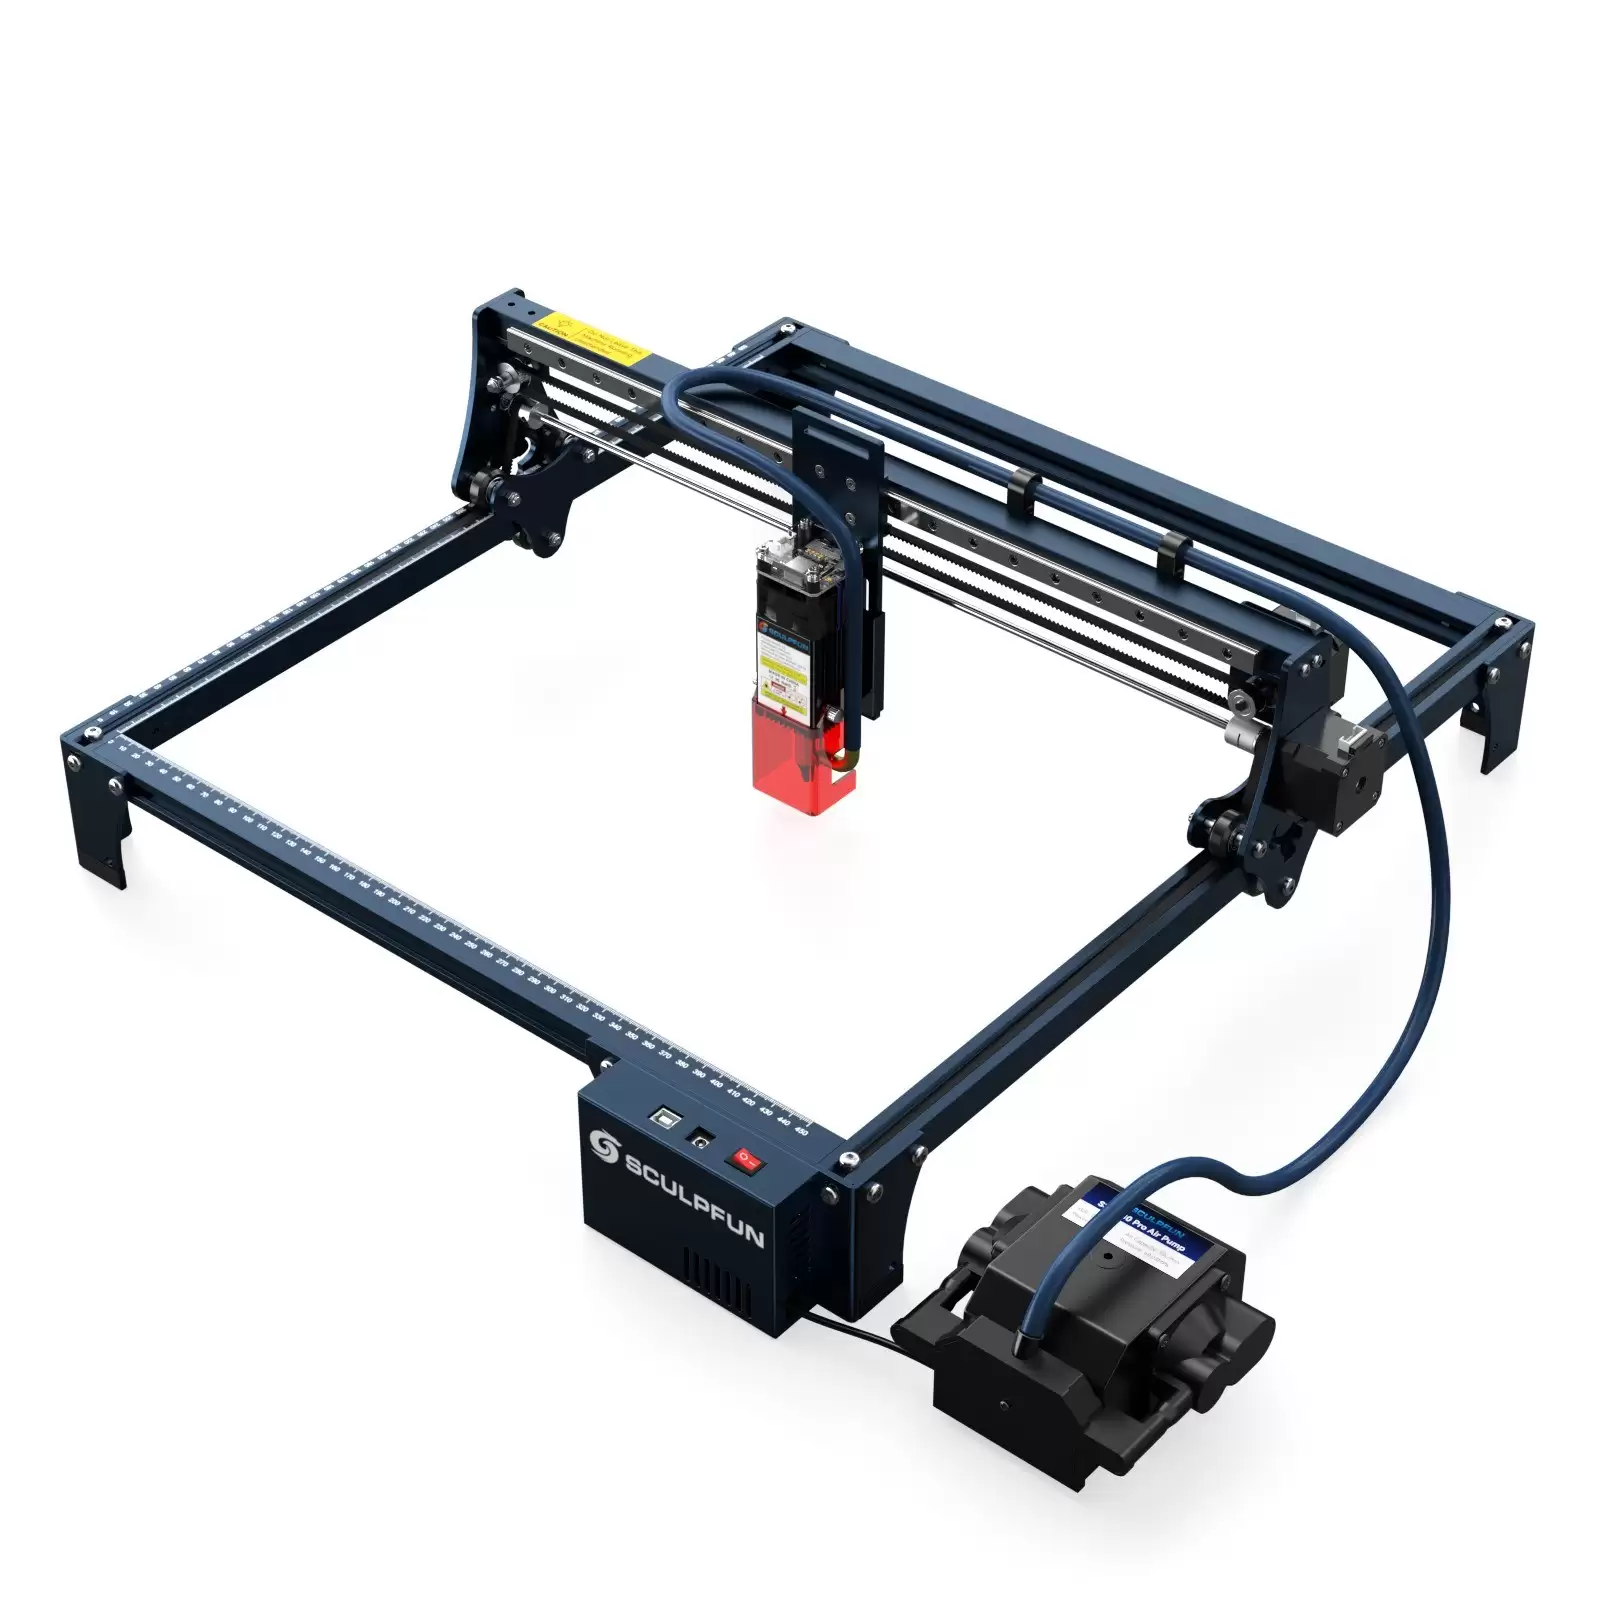 Order In Just €215 Sculpfun S30 5w Laser Engraver With This Discount Coupon At Cafago